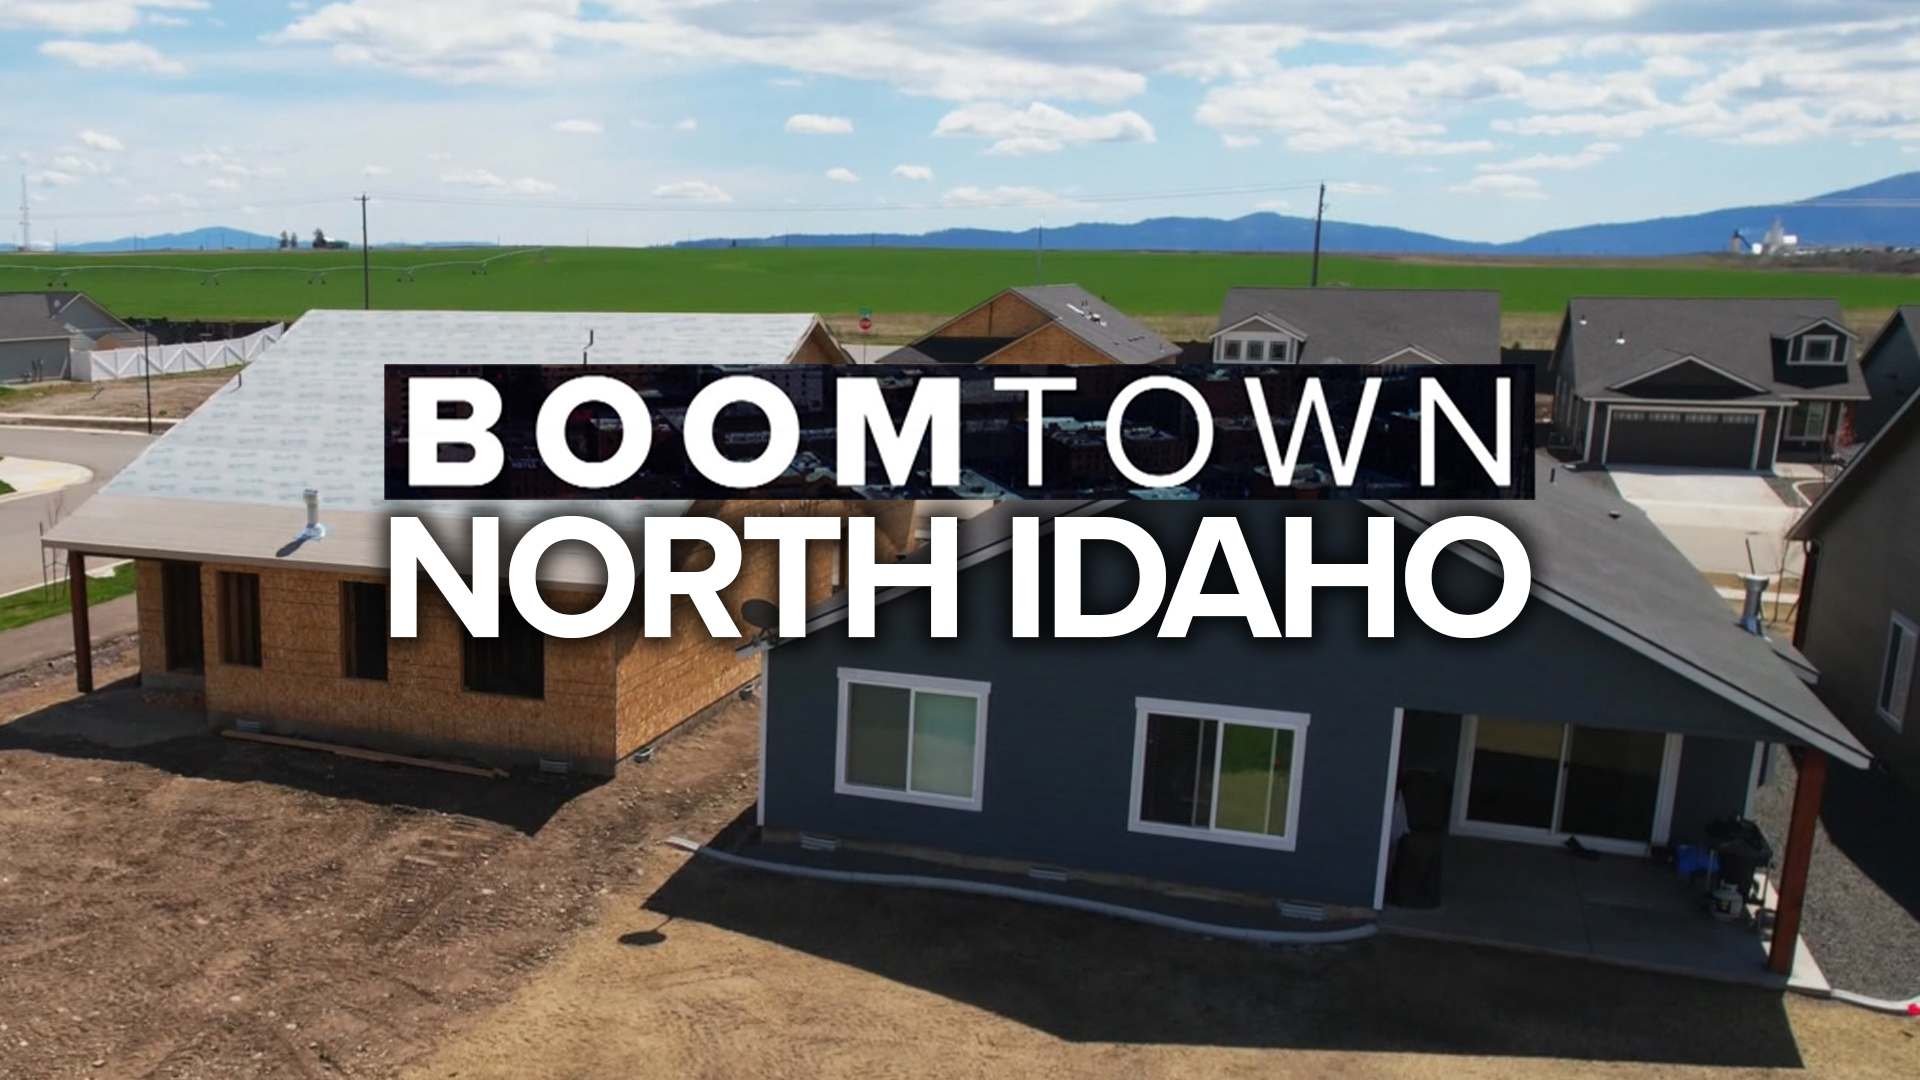 North Idaho is booming. In this KREM 2 News Boomtown special, we look closely at how the growth affects housing, transportation, jobs, and more.